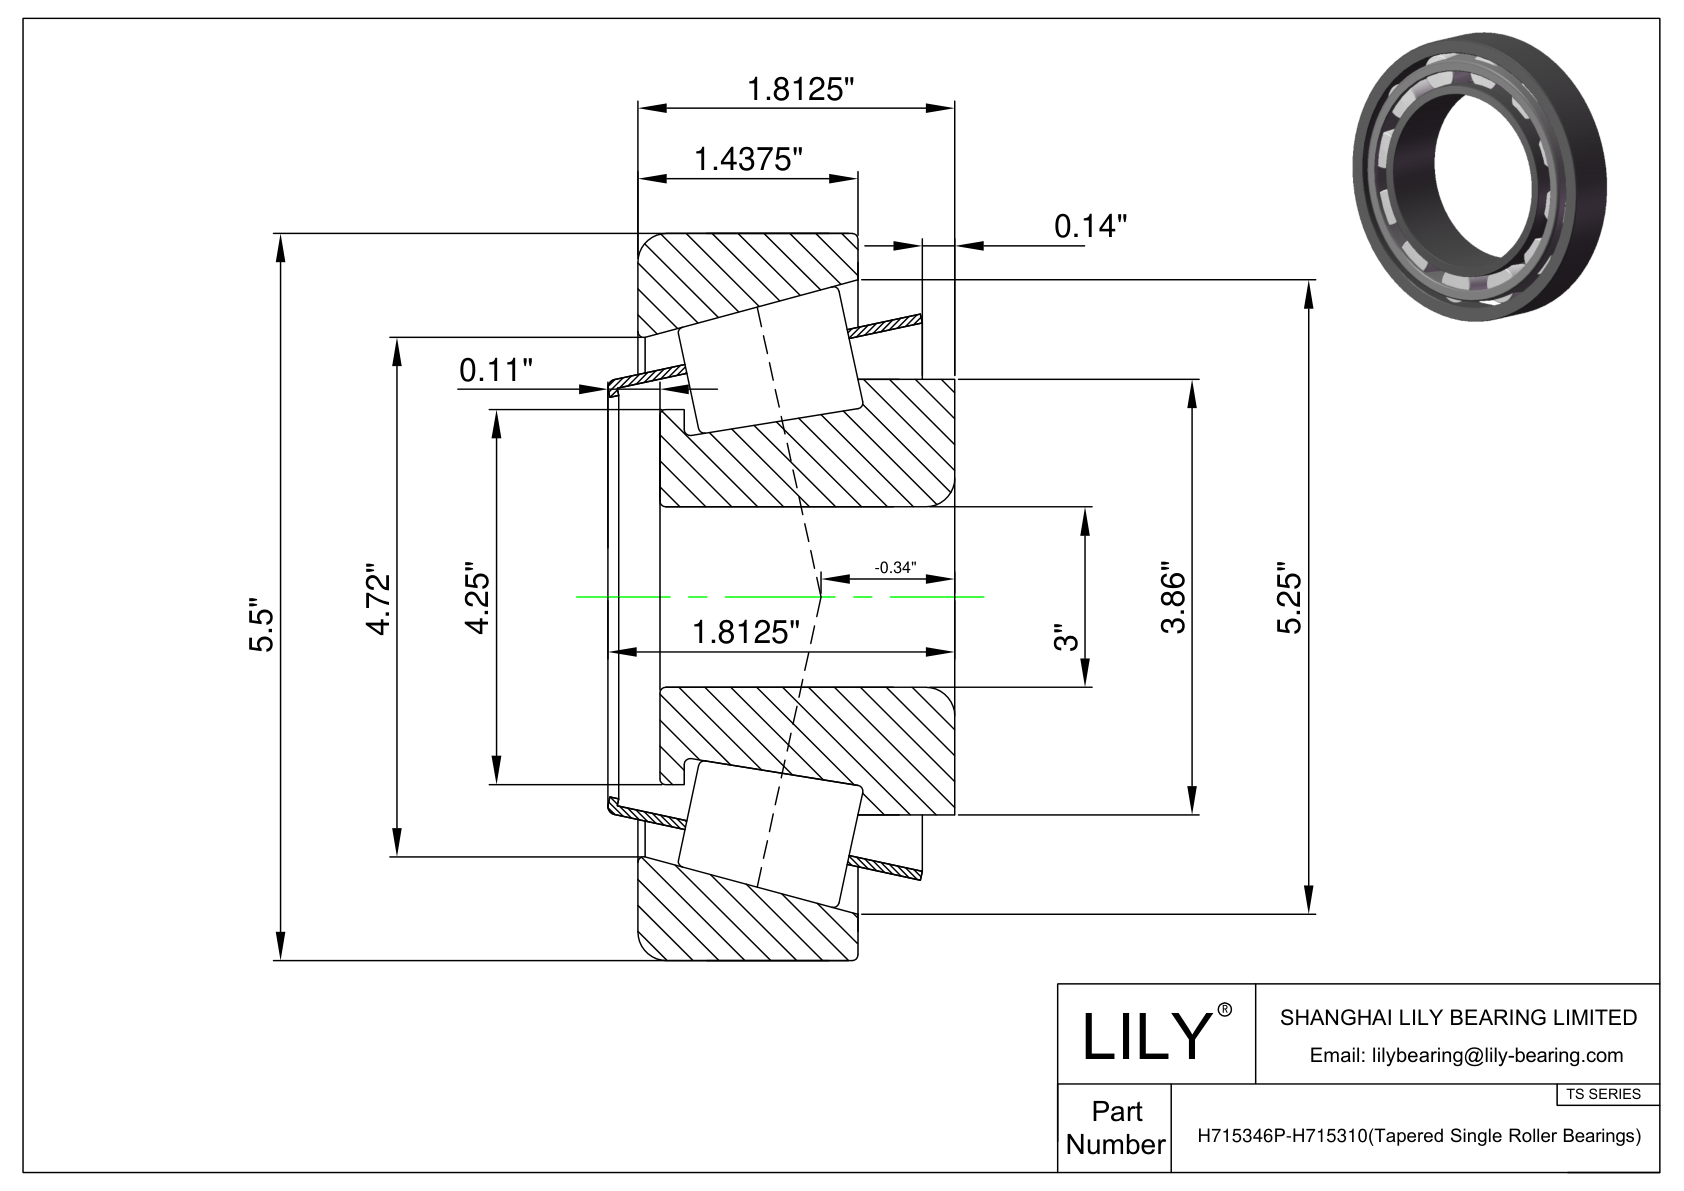 H715346P-H715310 TS (Tapered Single Roller Bearings) (Imperial) cad drawing